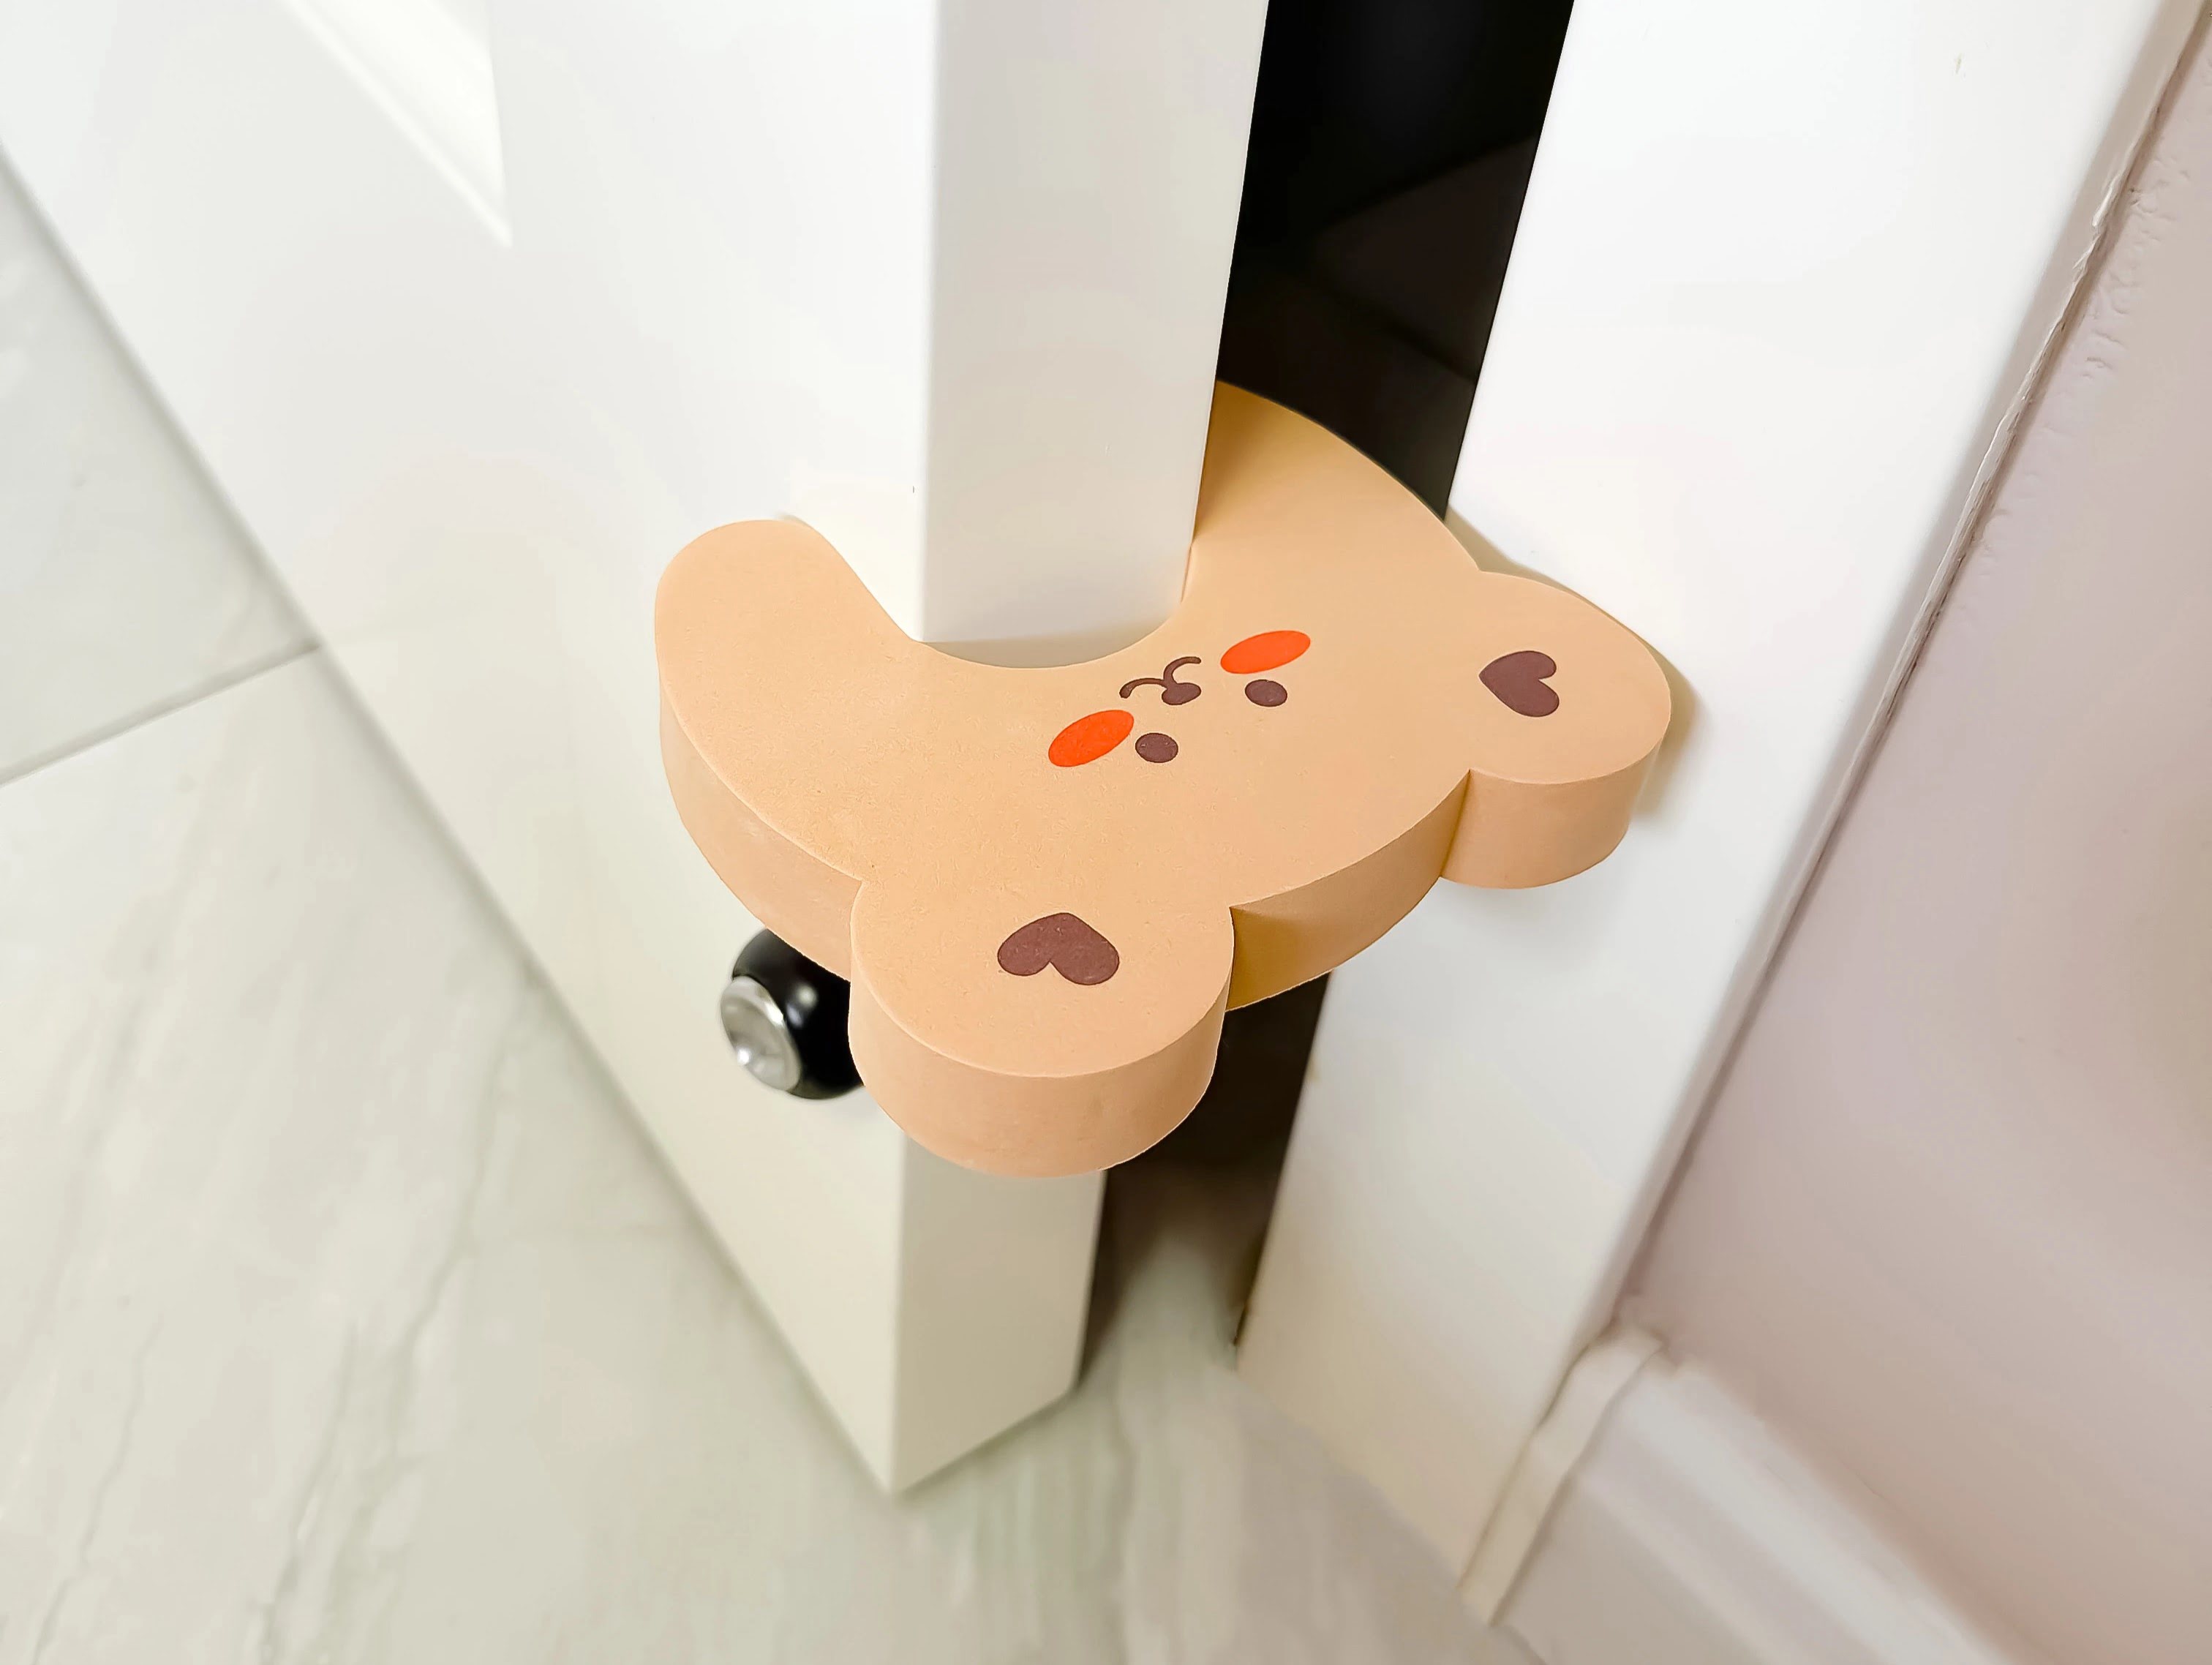 Review: Baby Safety Door Stopper – The Best Choice for Childproofing